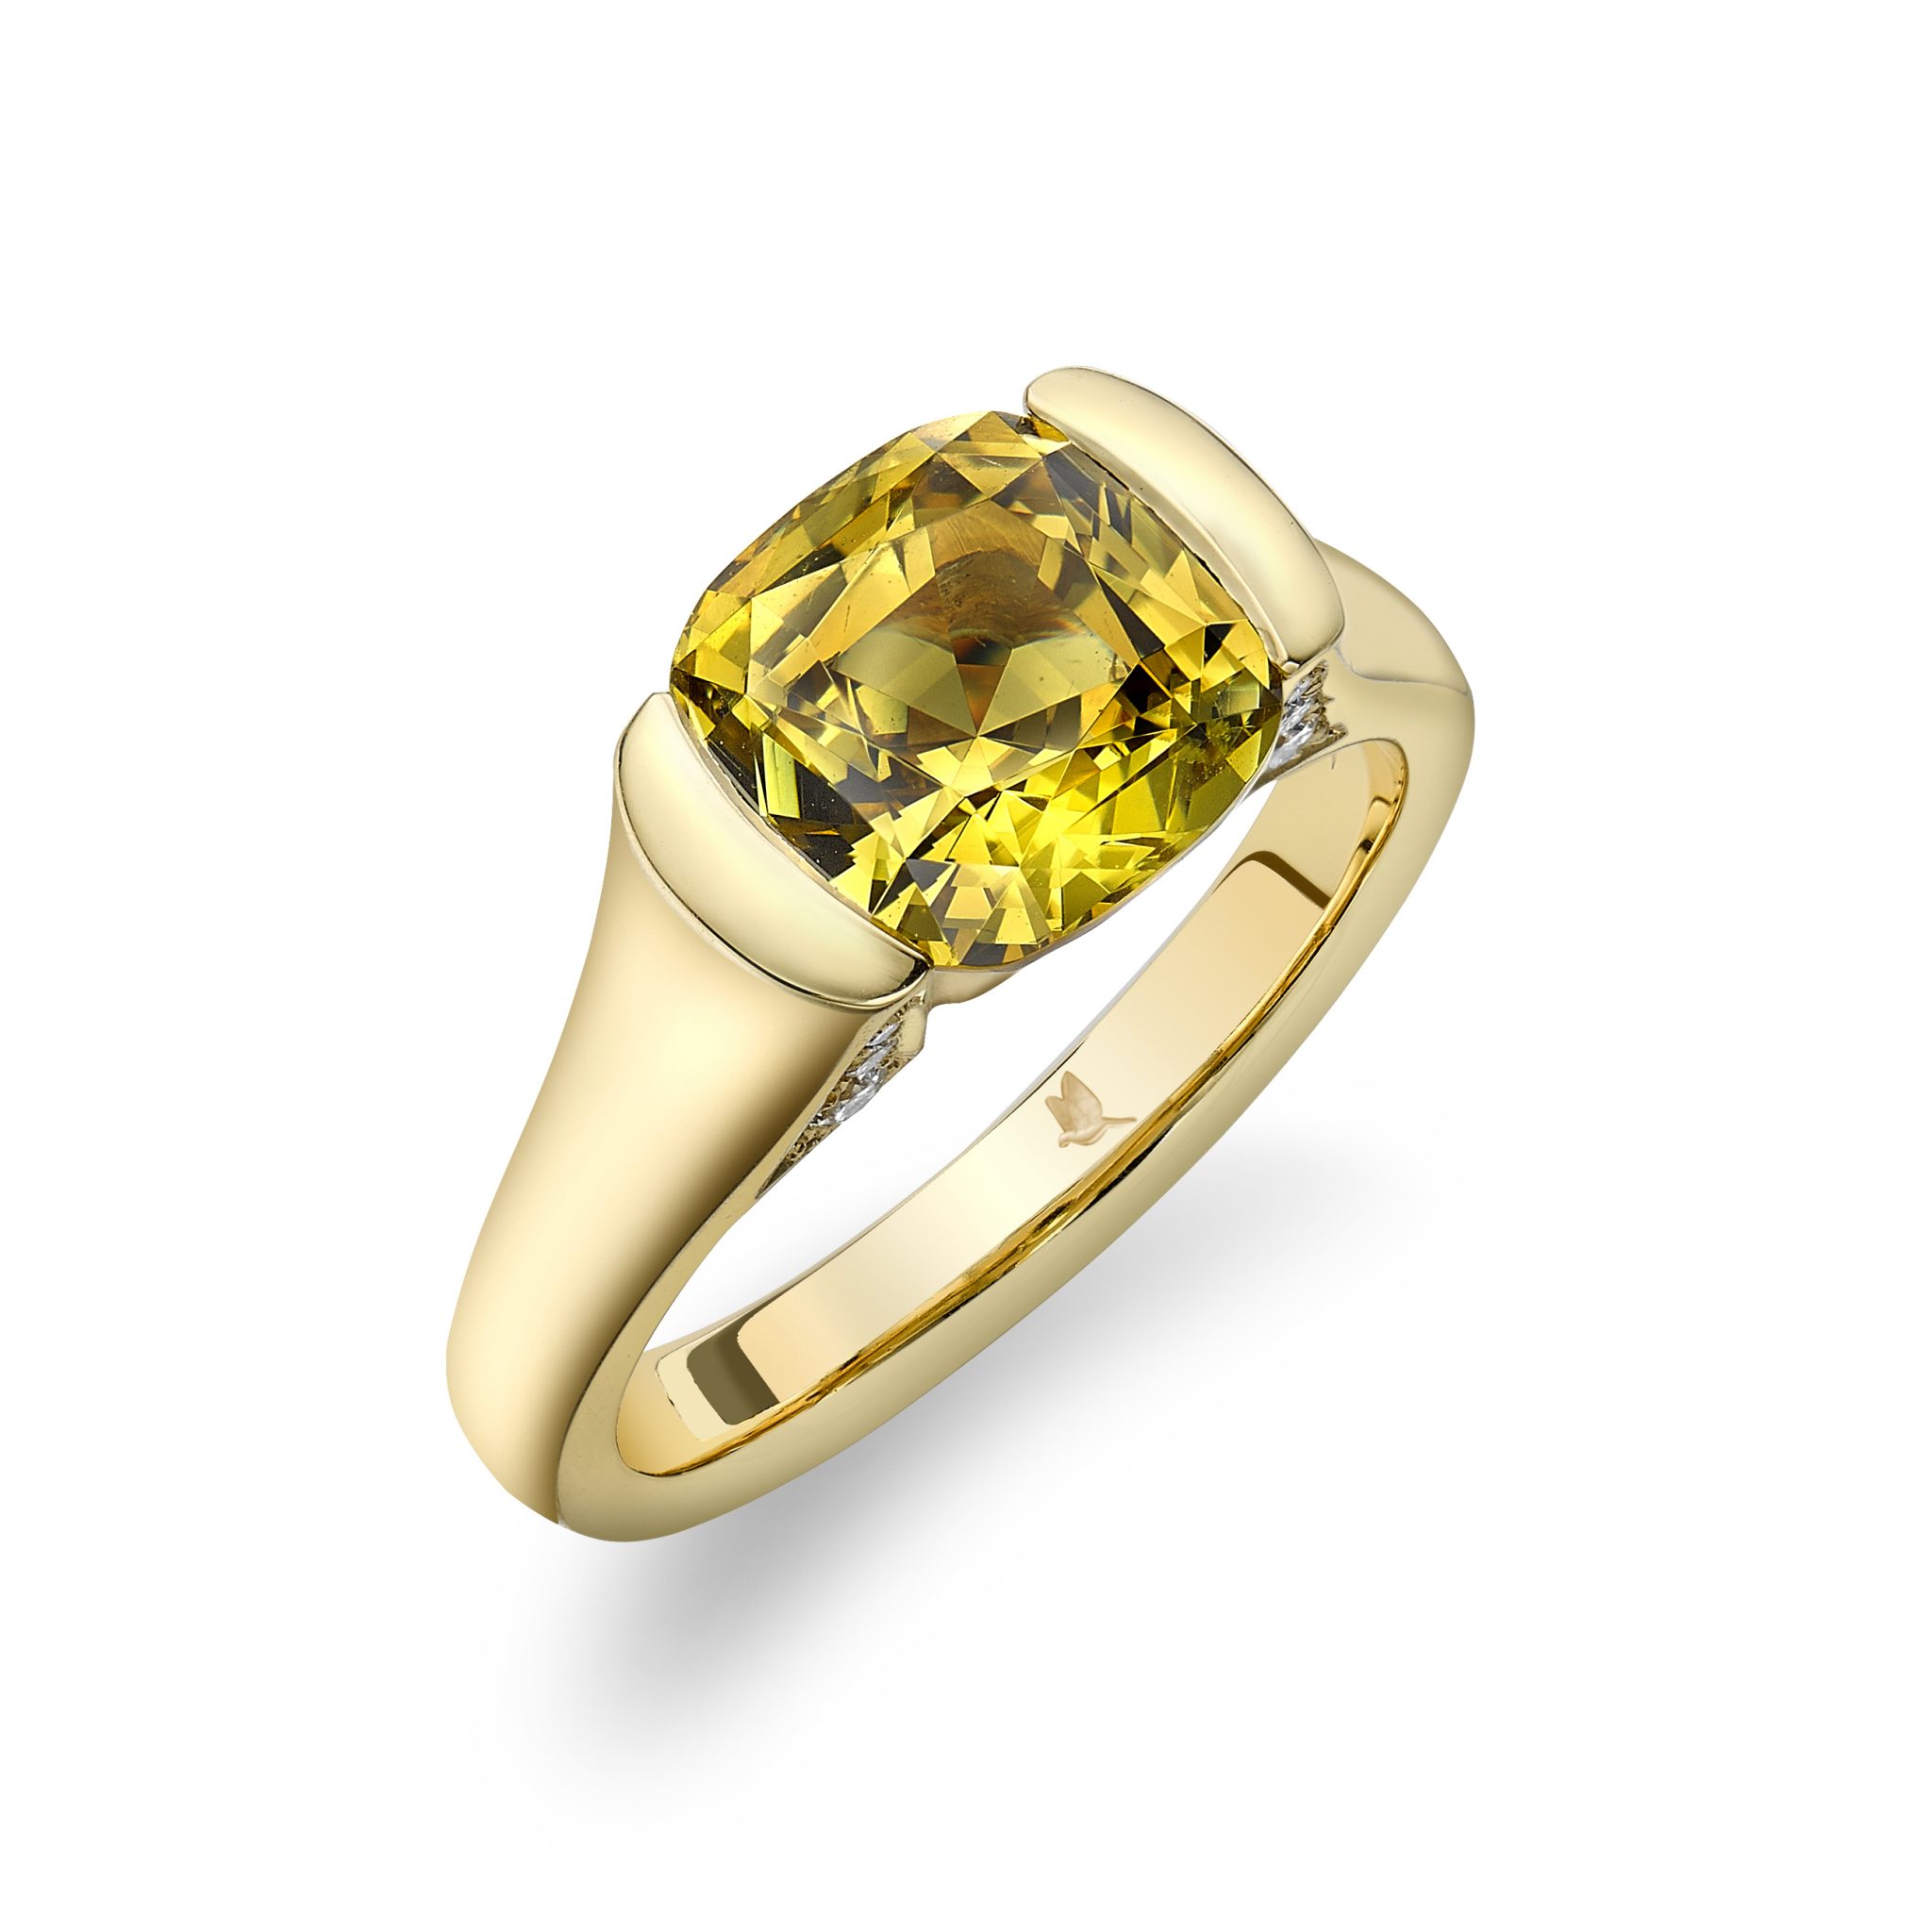 Ring in yellow gold with rare grossular andradite garnet